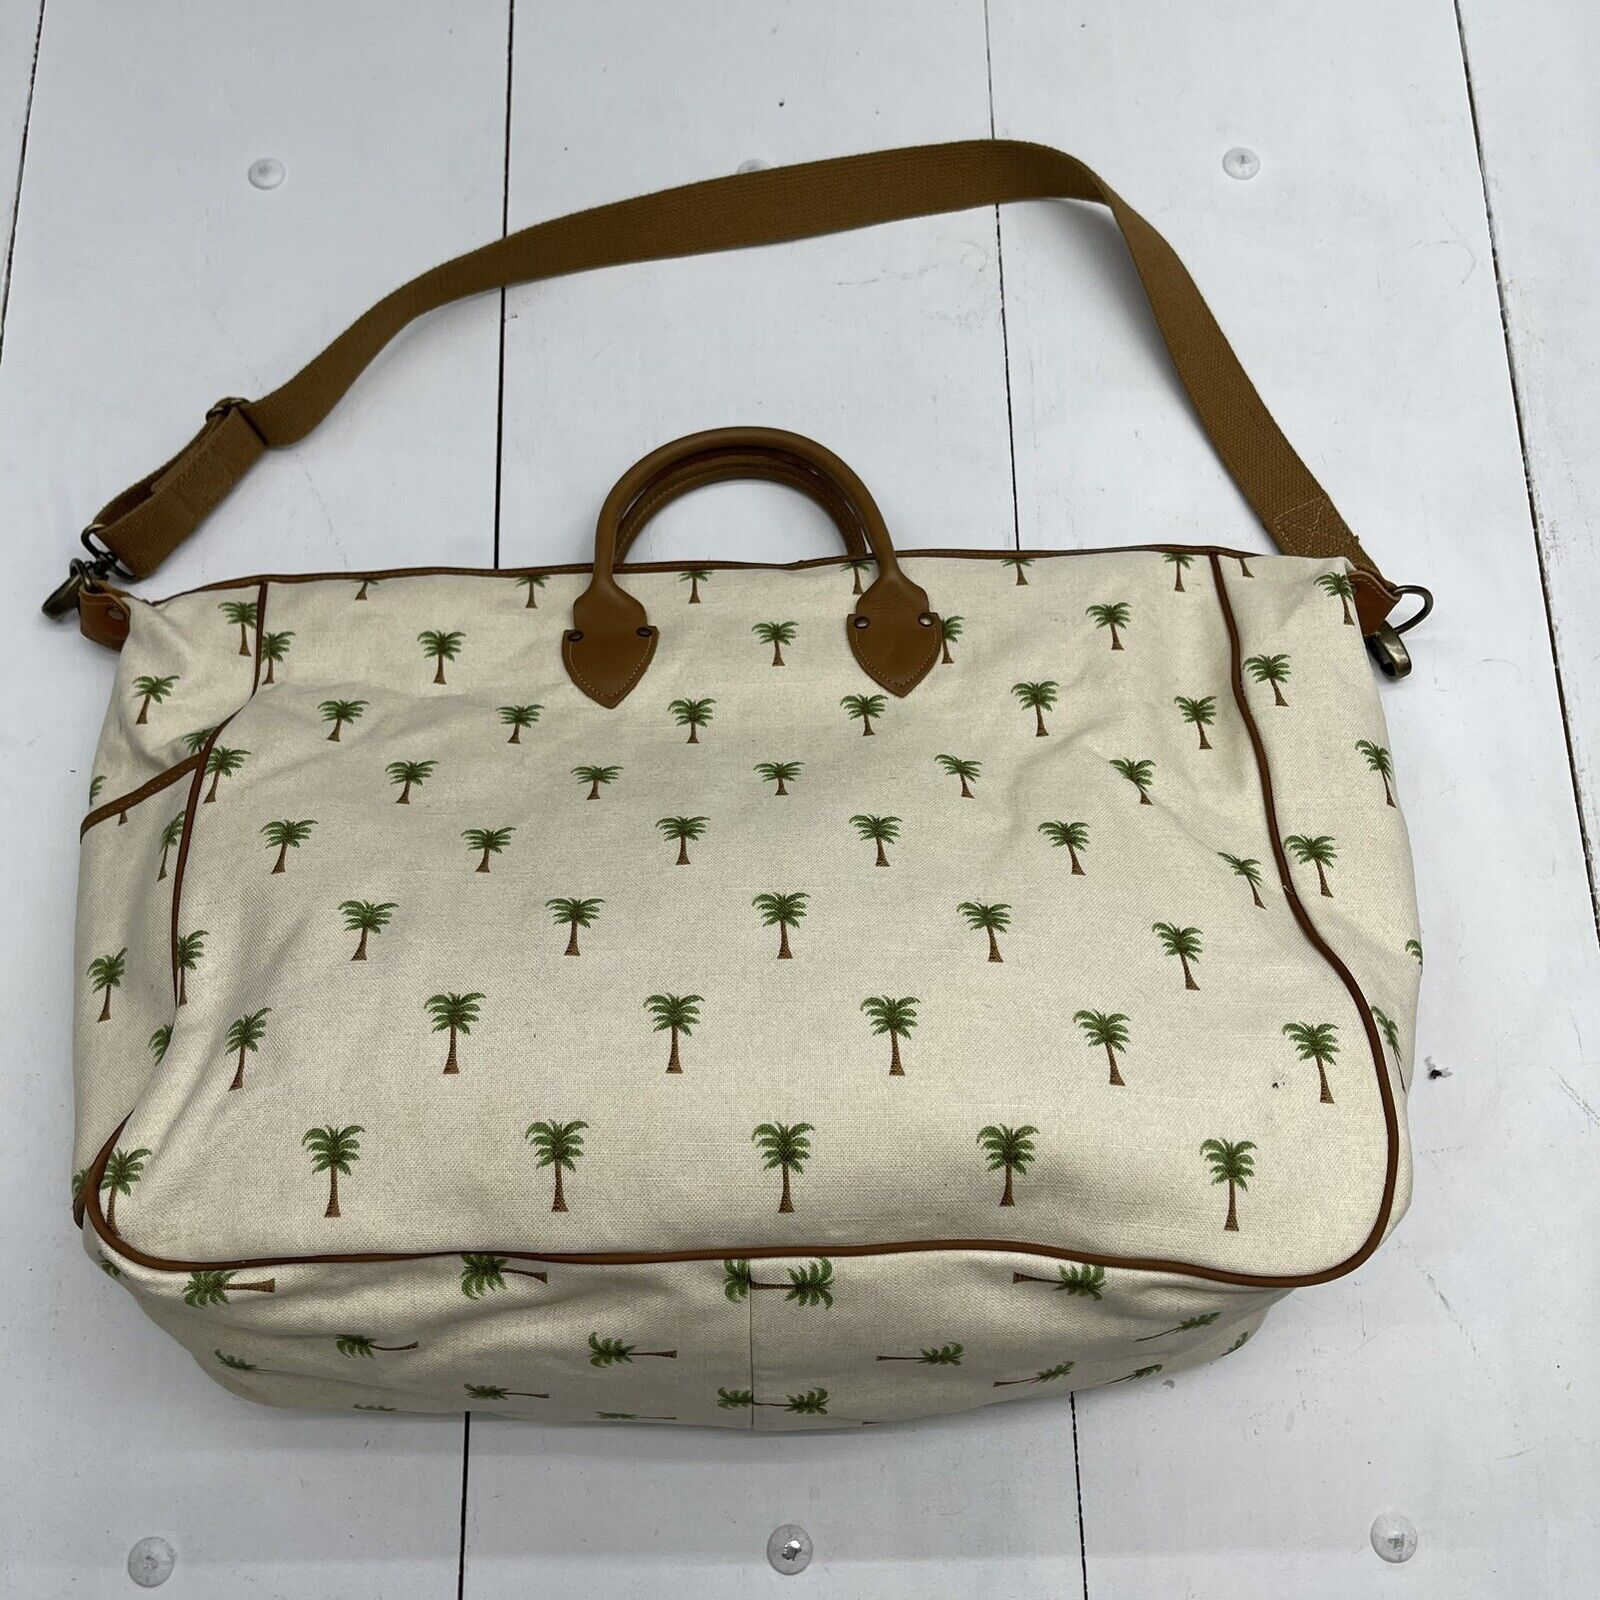 Accessories Unlimited British Palm Trees Canvas Weekender Bag New Defects